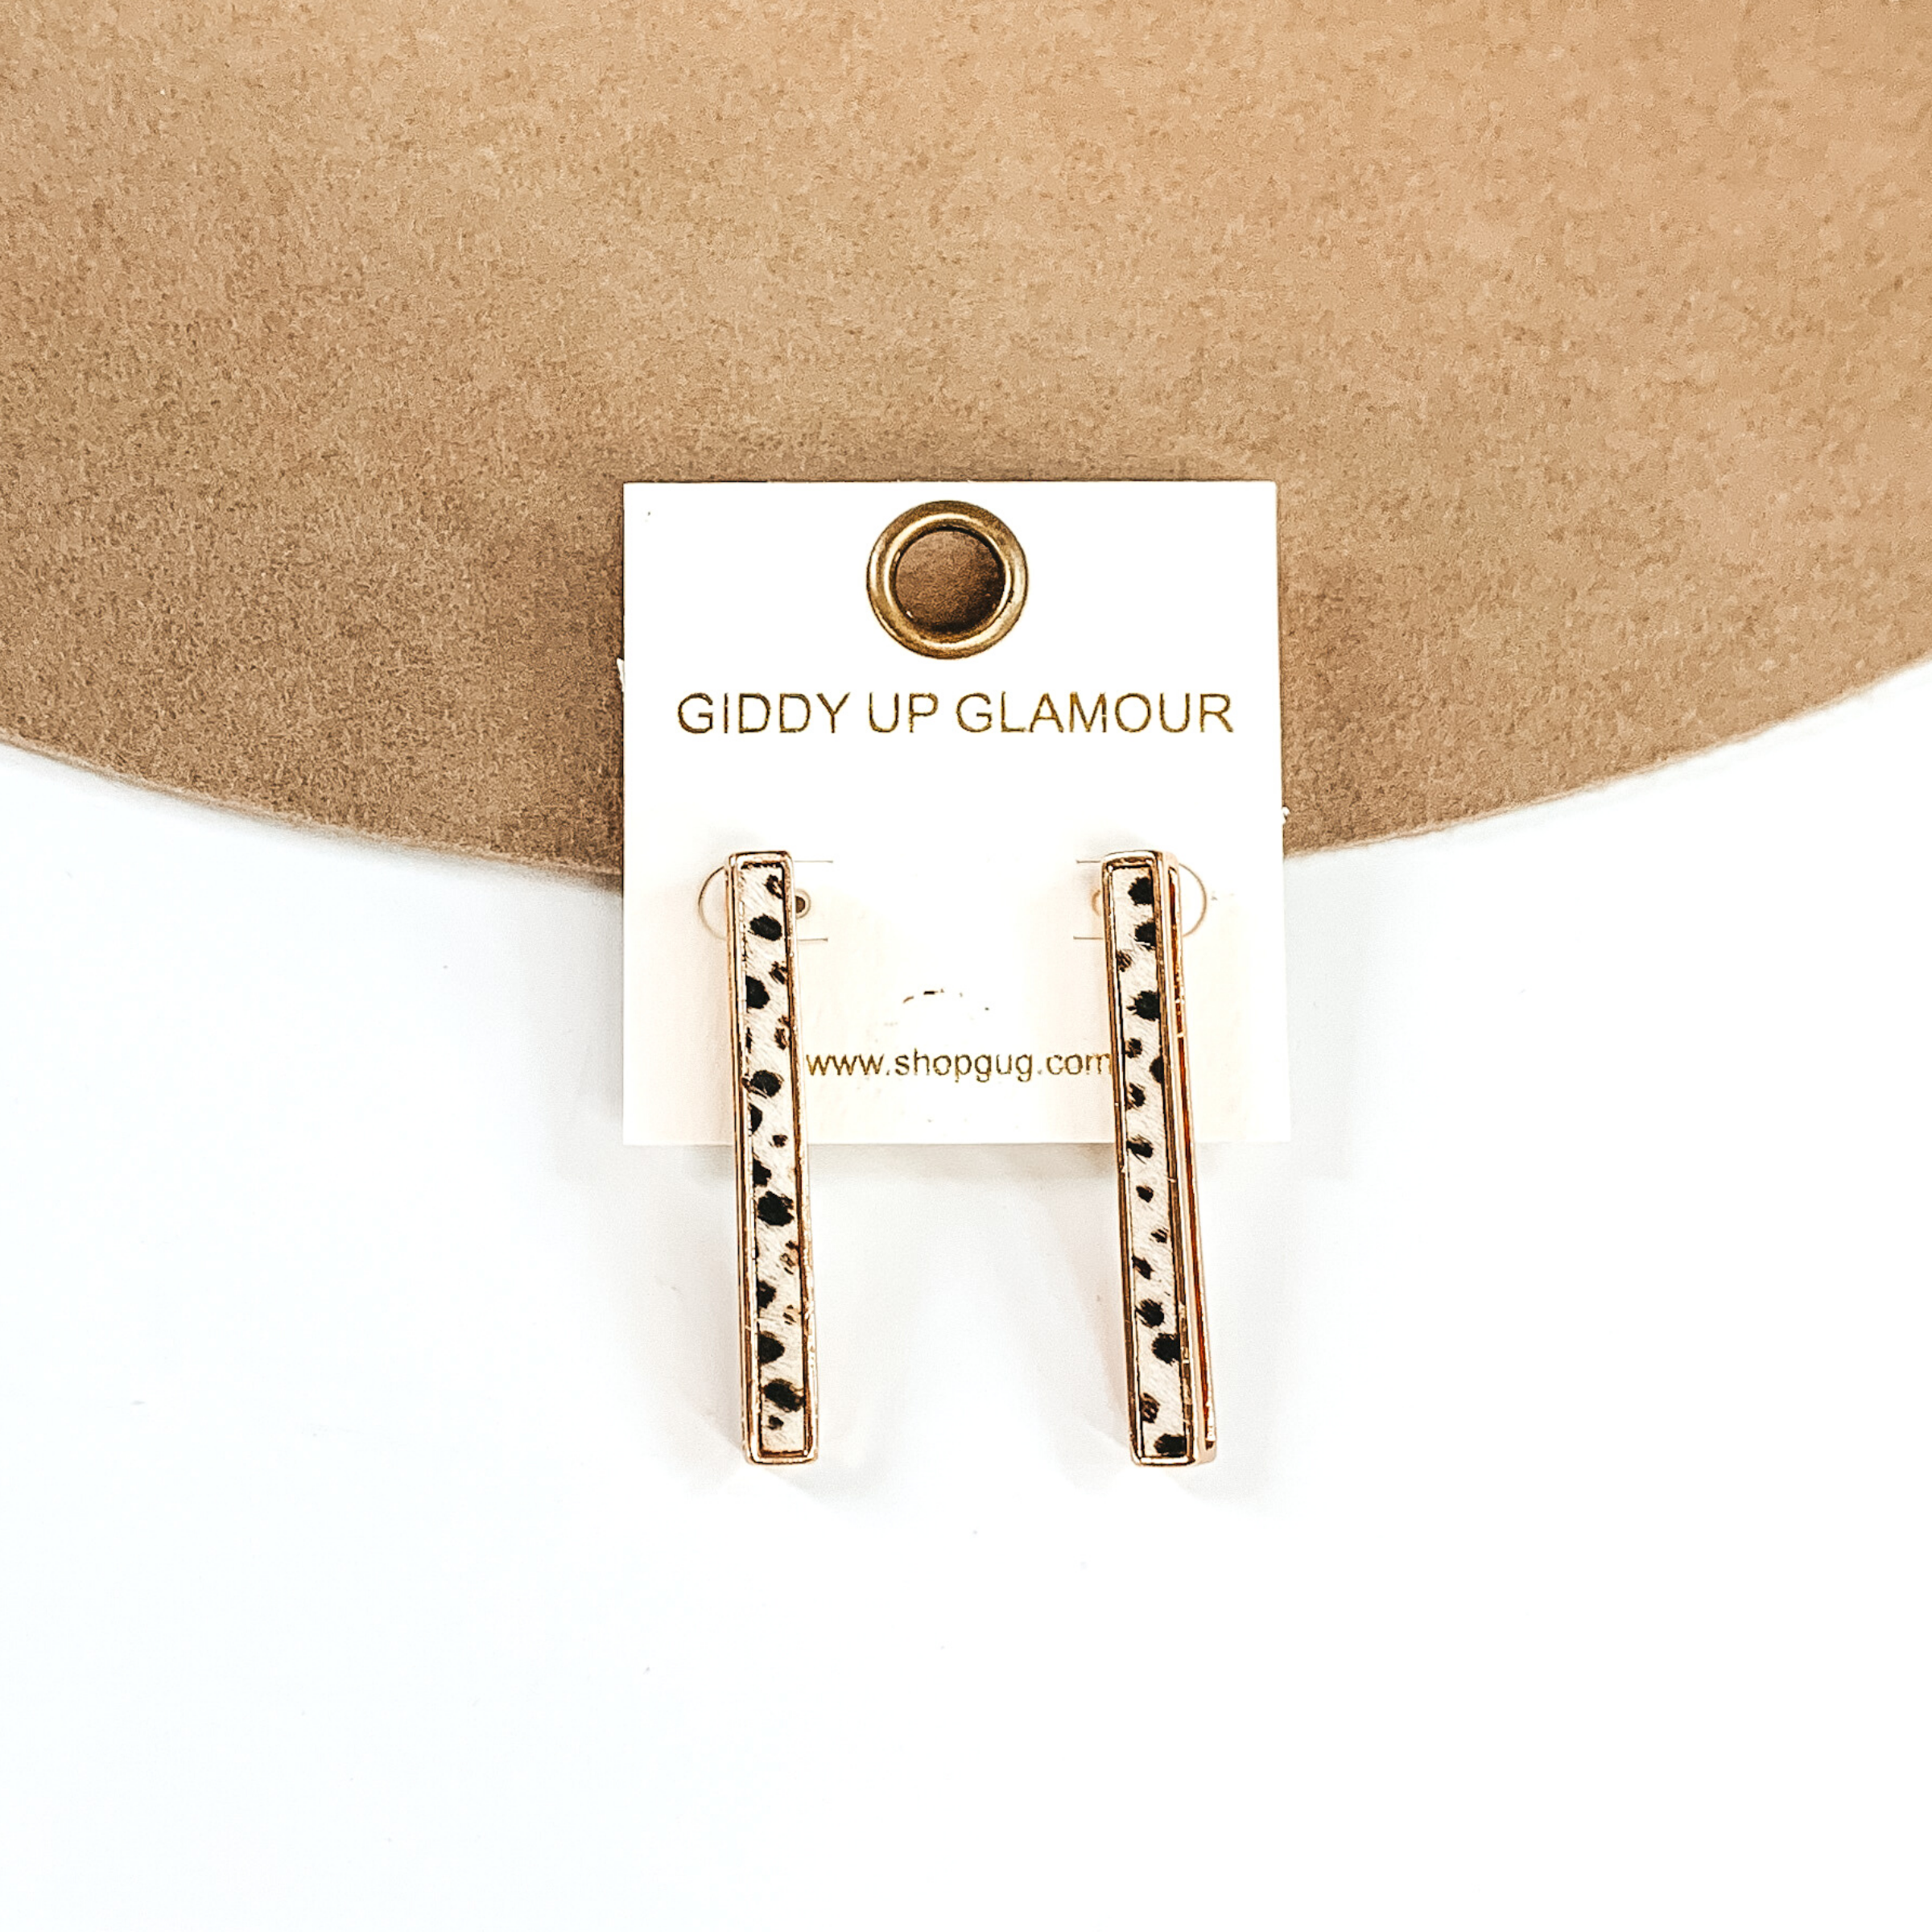 Gold rectangle bar earrings with a white dotted inlay on a white earrings holder. These earrings are pictured on a white and tan background.